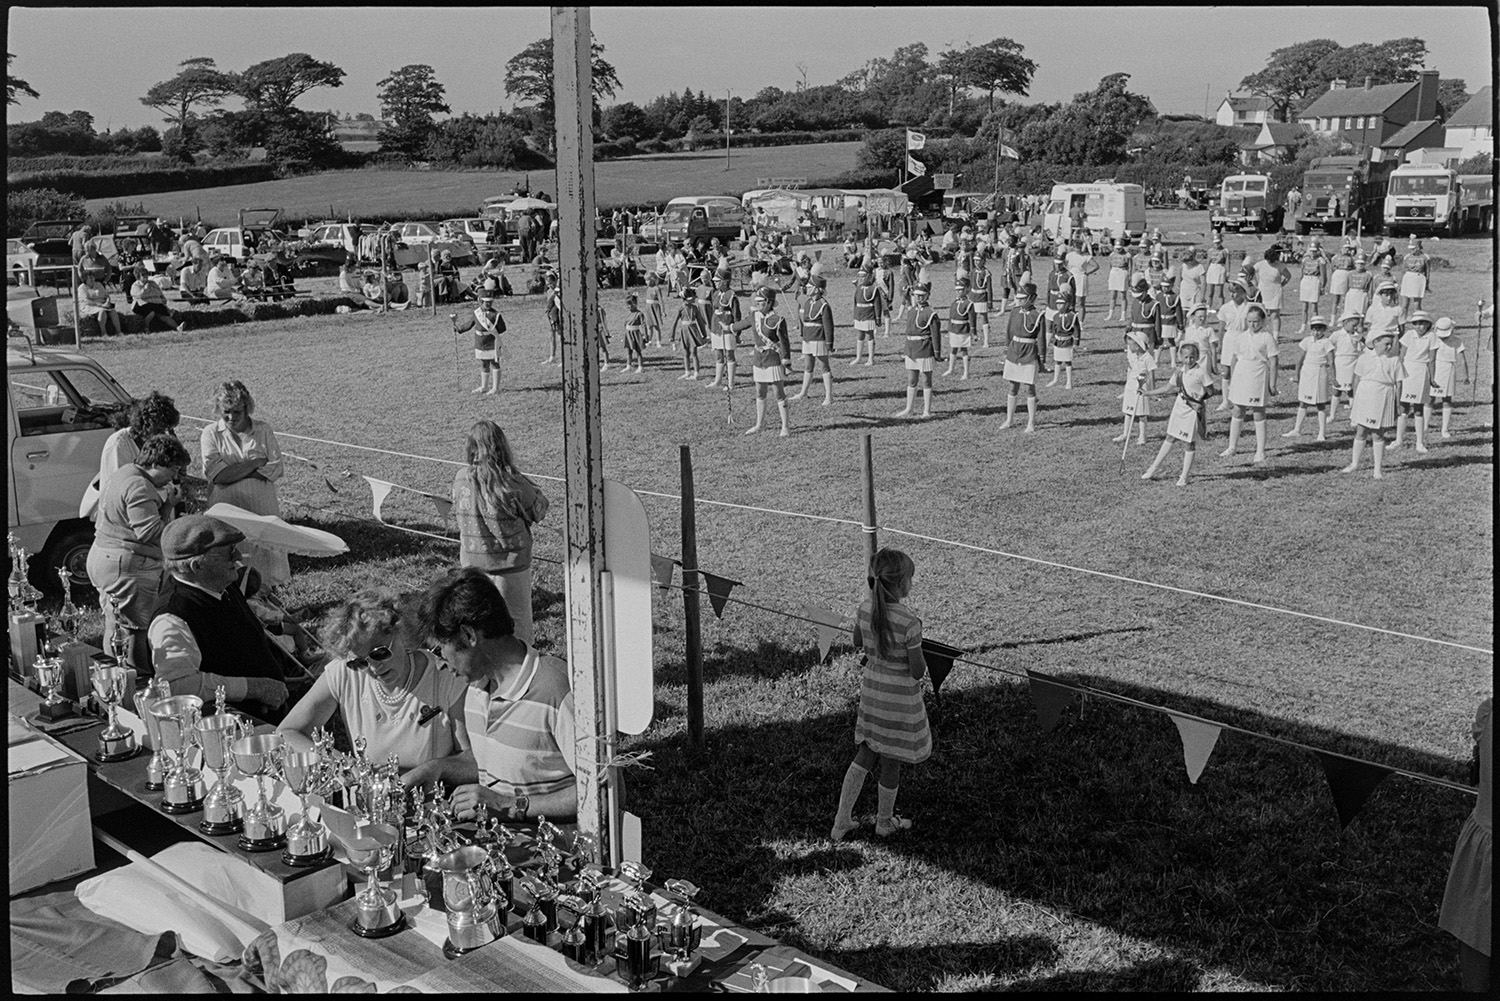 Country fair, majorettes, cups on display, stalls.
[Spectators watching groups of majorettes assembled in the showground at Ashreigney Country Fair. There is a table with trophies on display. Also in the field are spectators, vintage lorries, stalls and an ice cream van.]